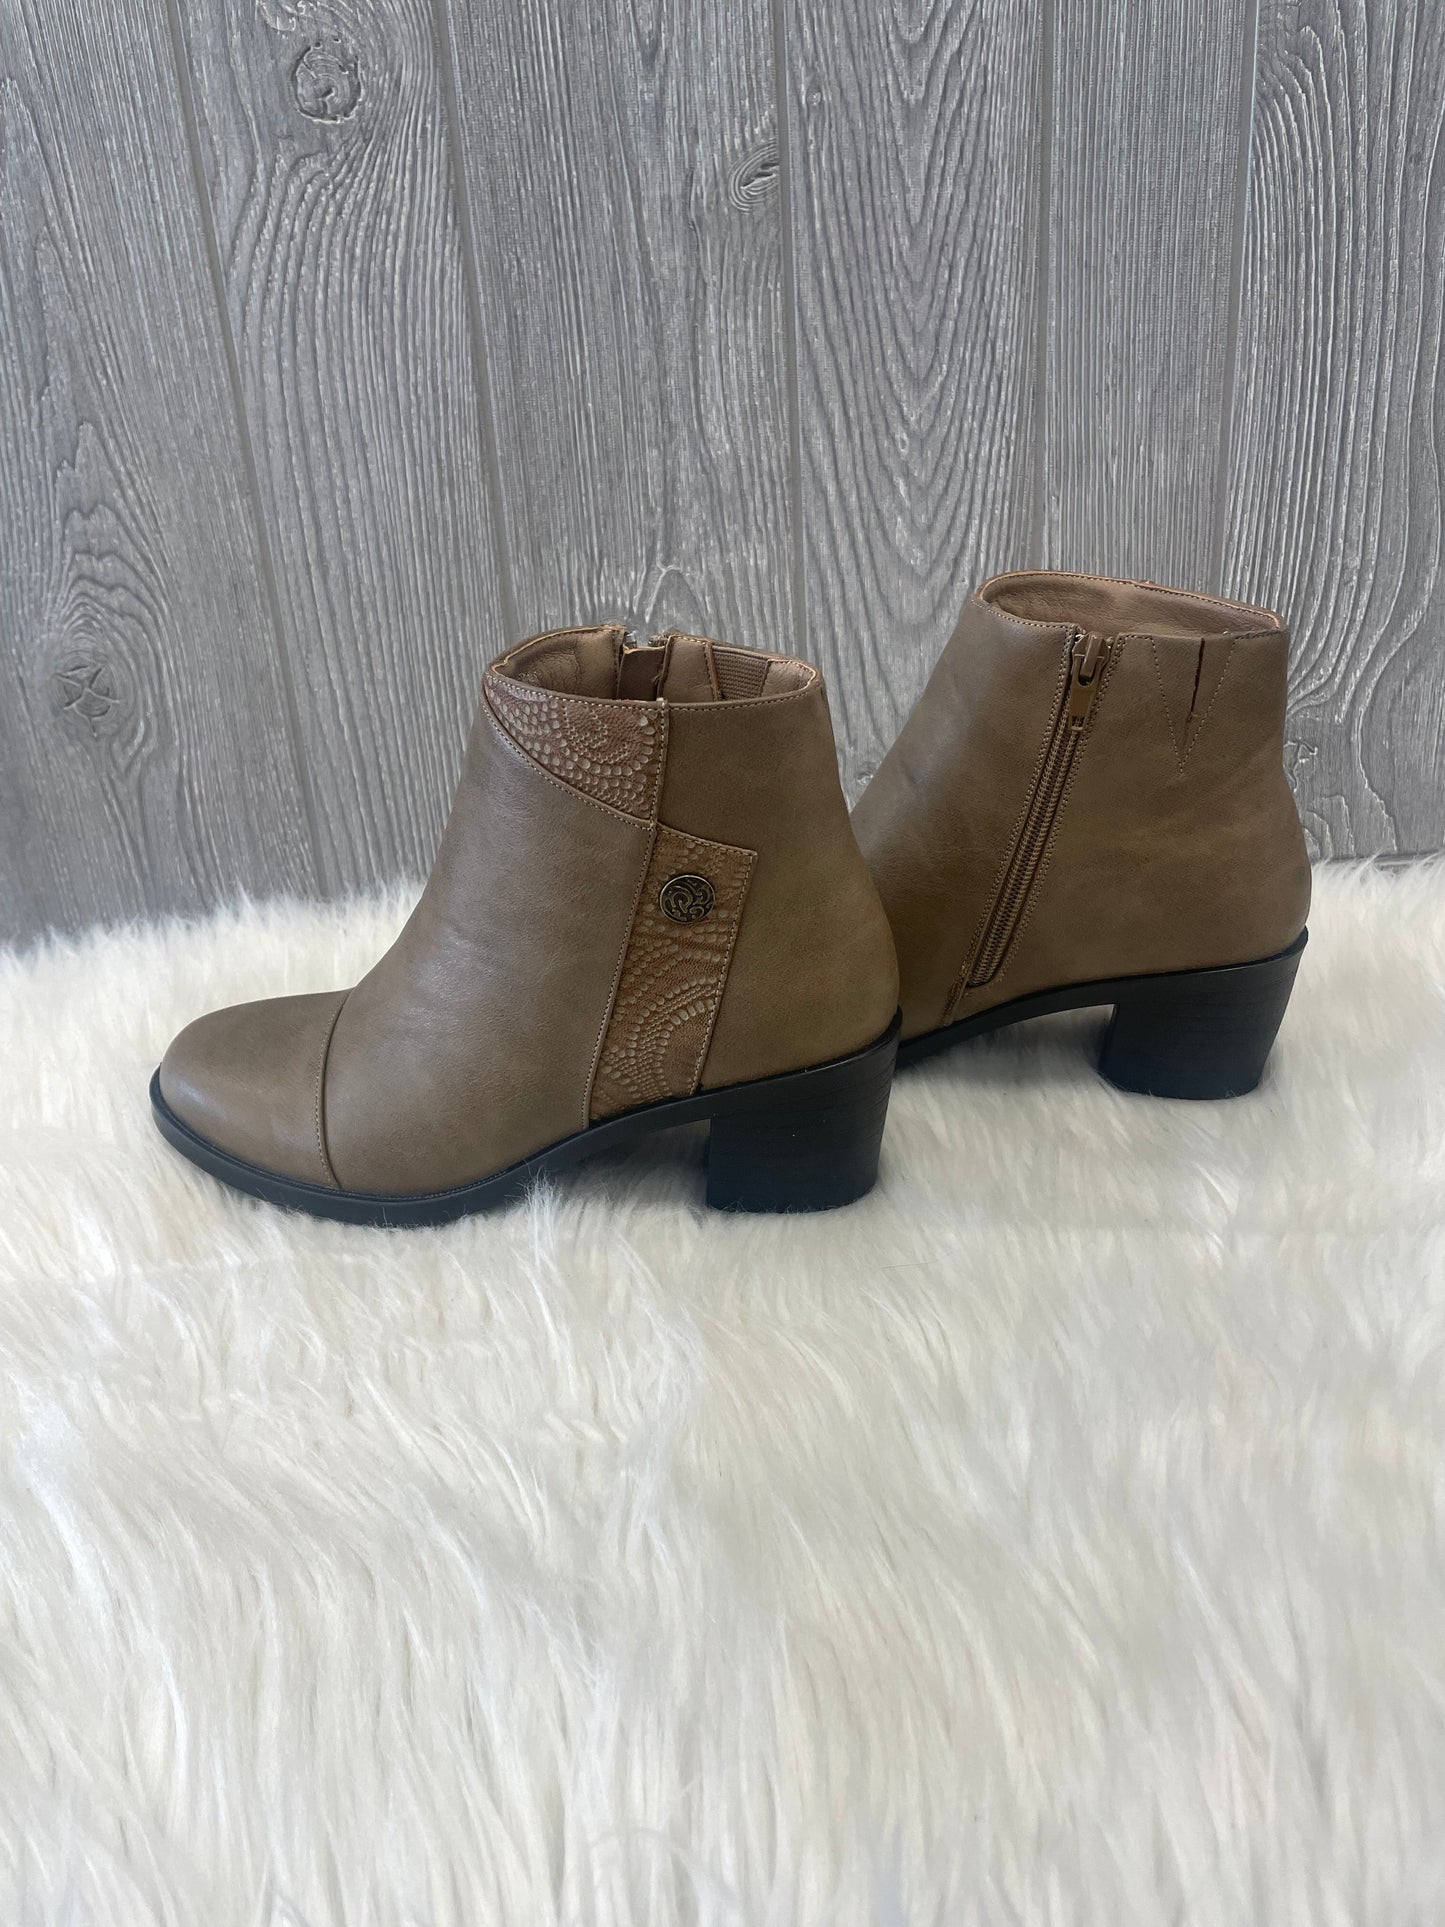 Boots Ankle Heels By Easy Street  Size: 6.5